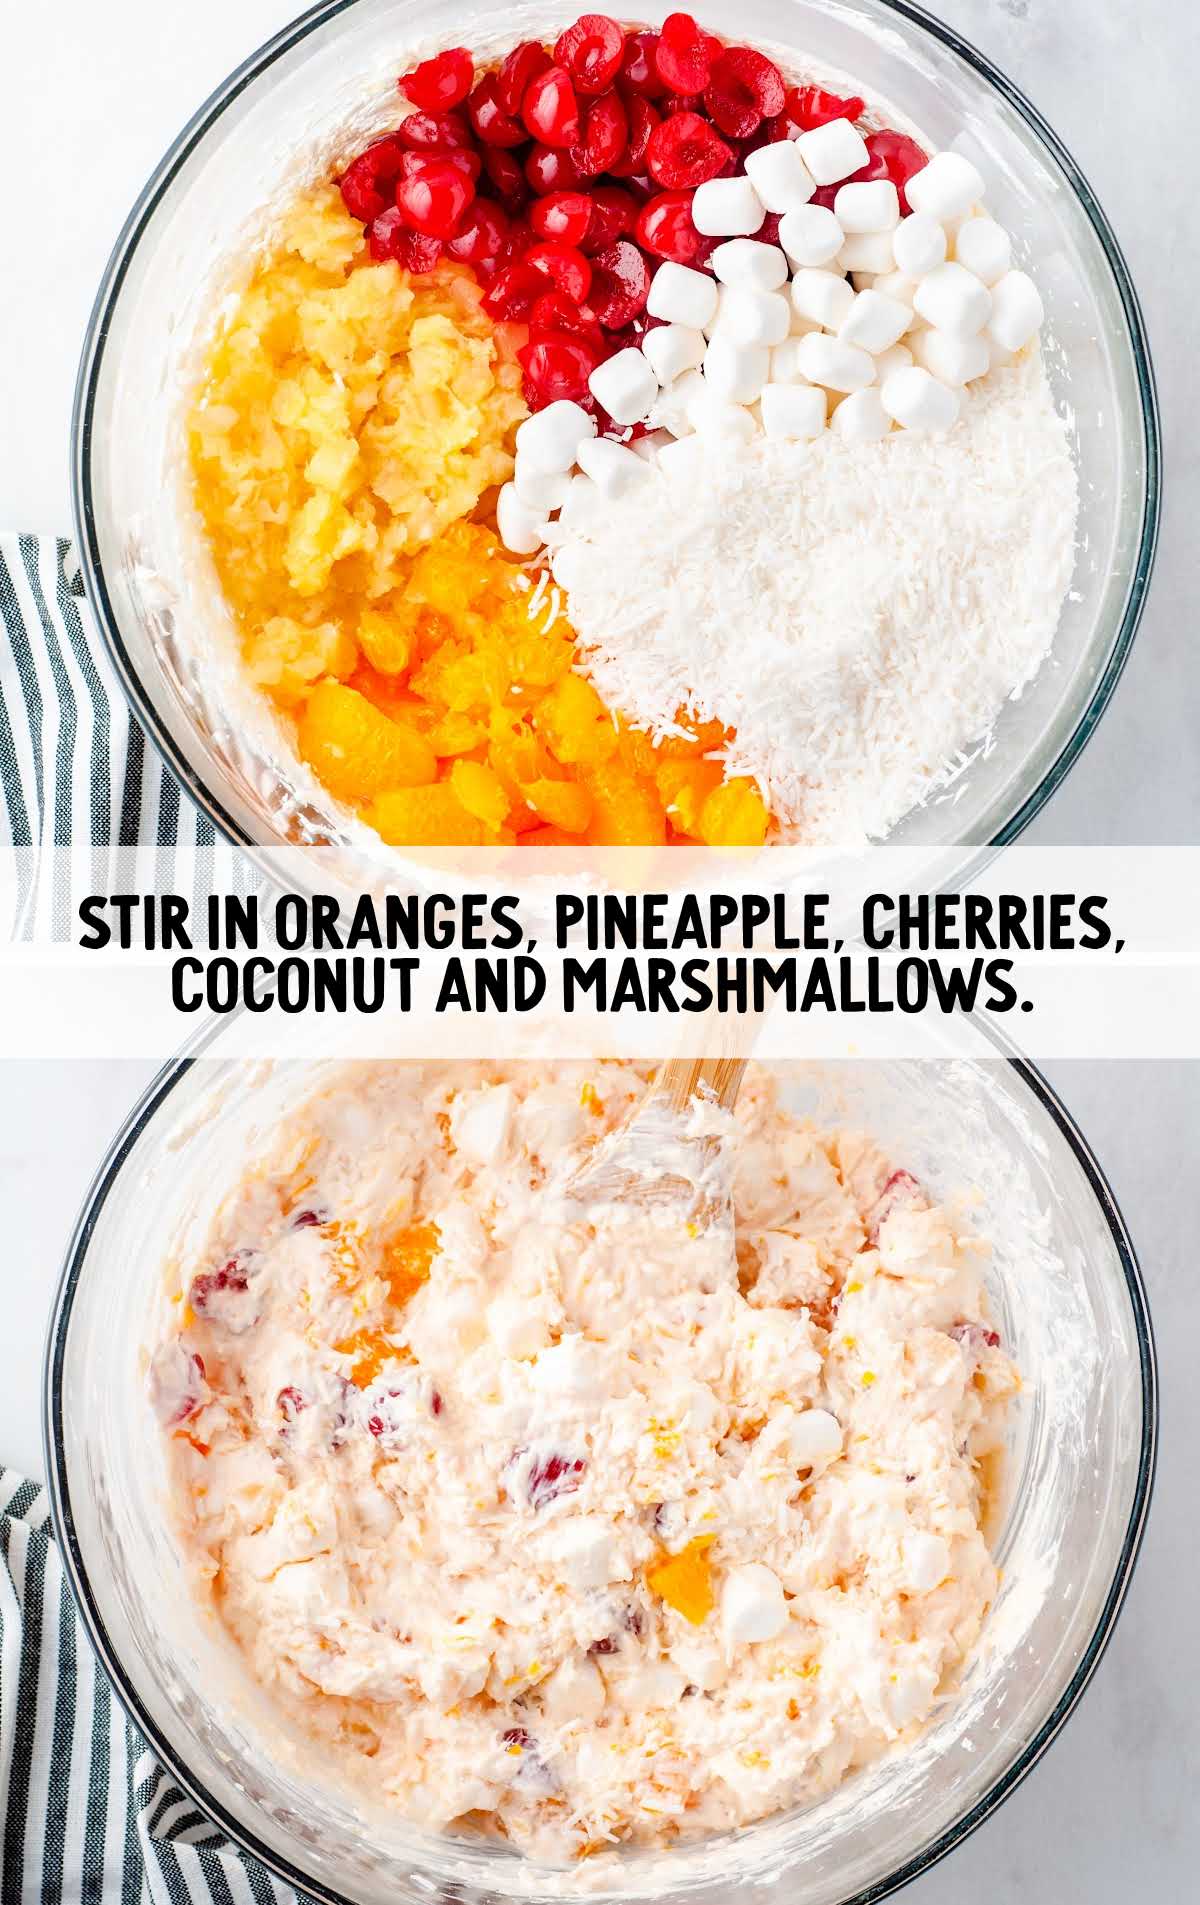 oranges, pineapple, cherries, coconut, and marshmallows stirred in a bowl